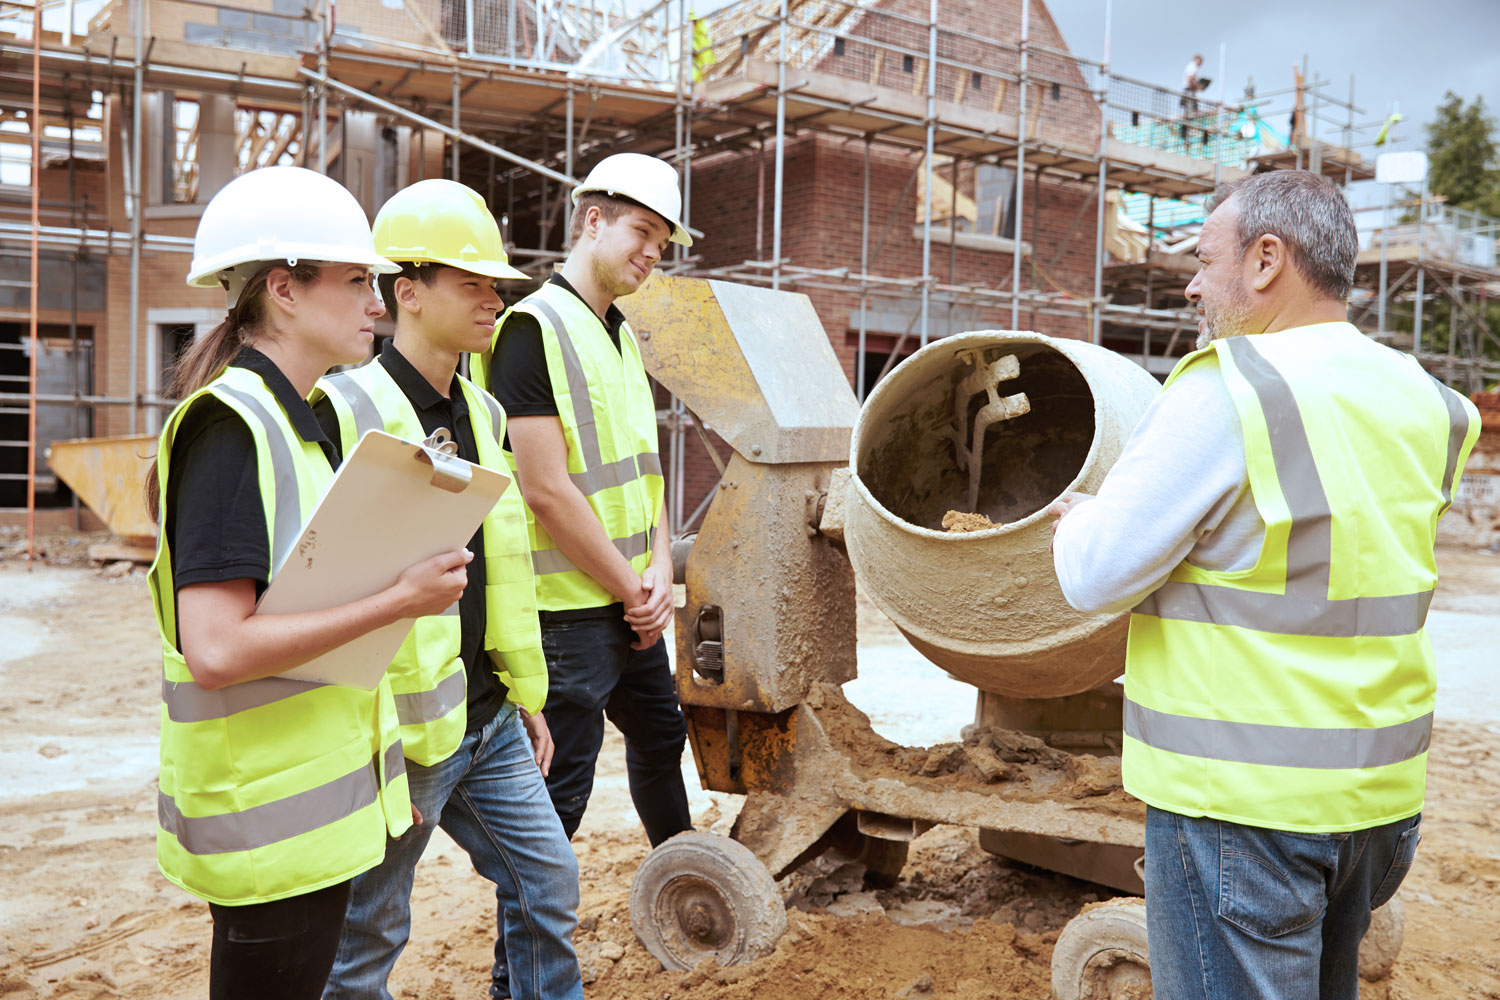 A group of students in person training on construction site